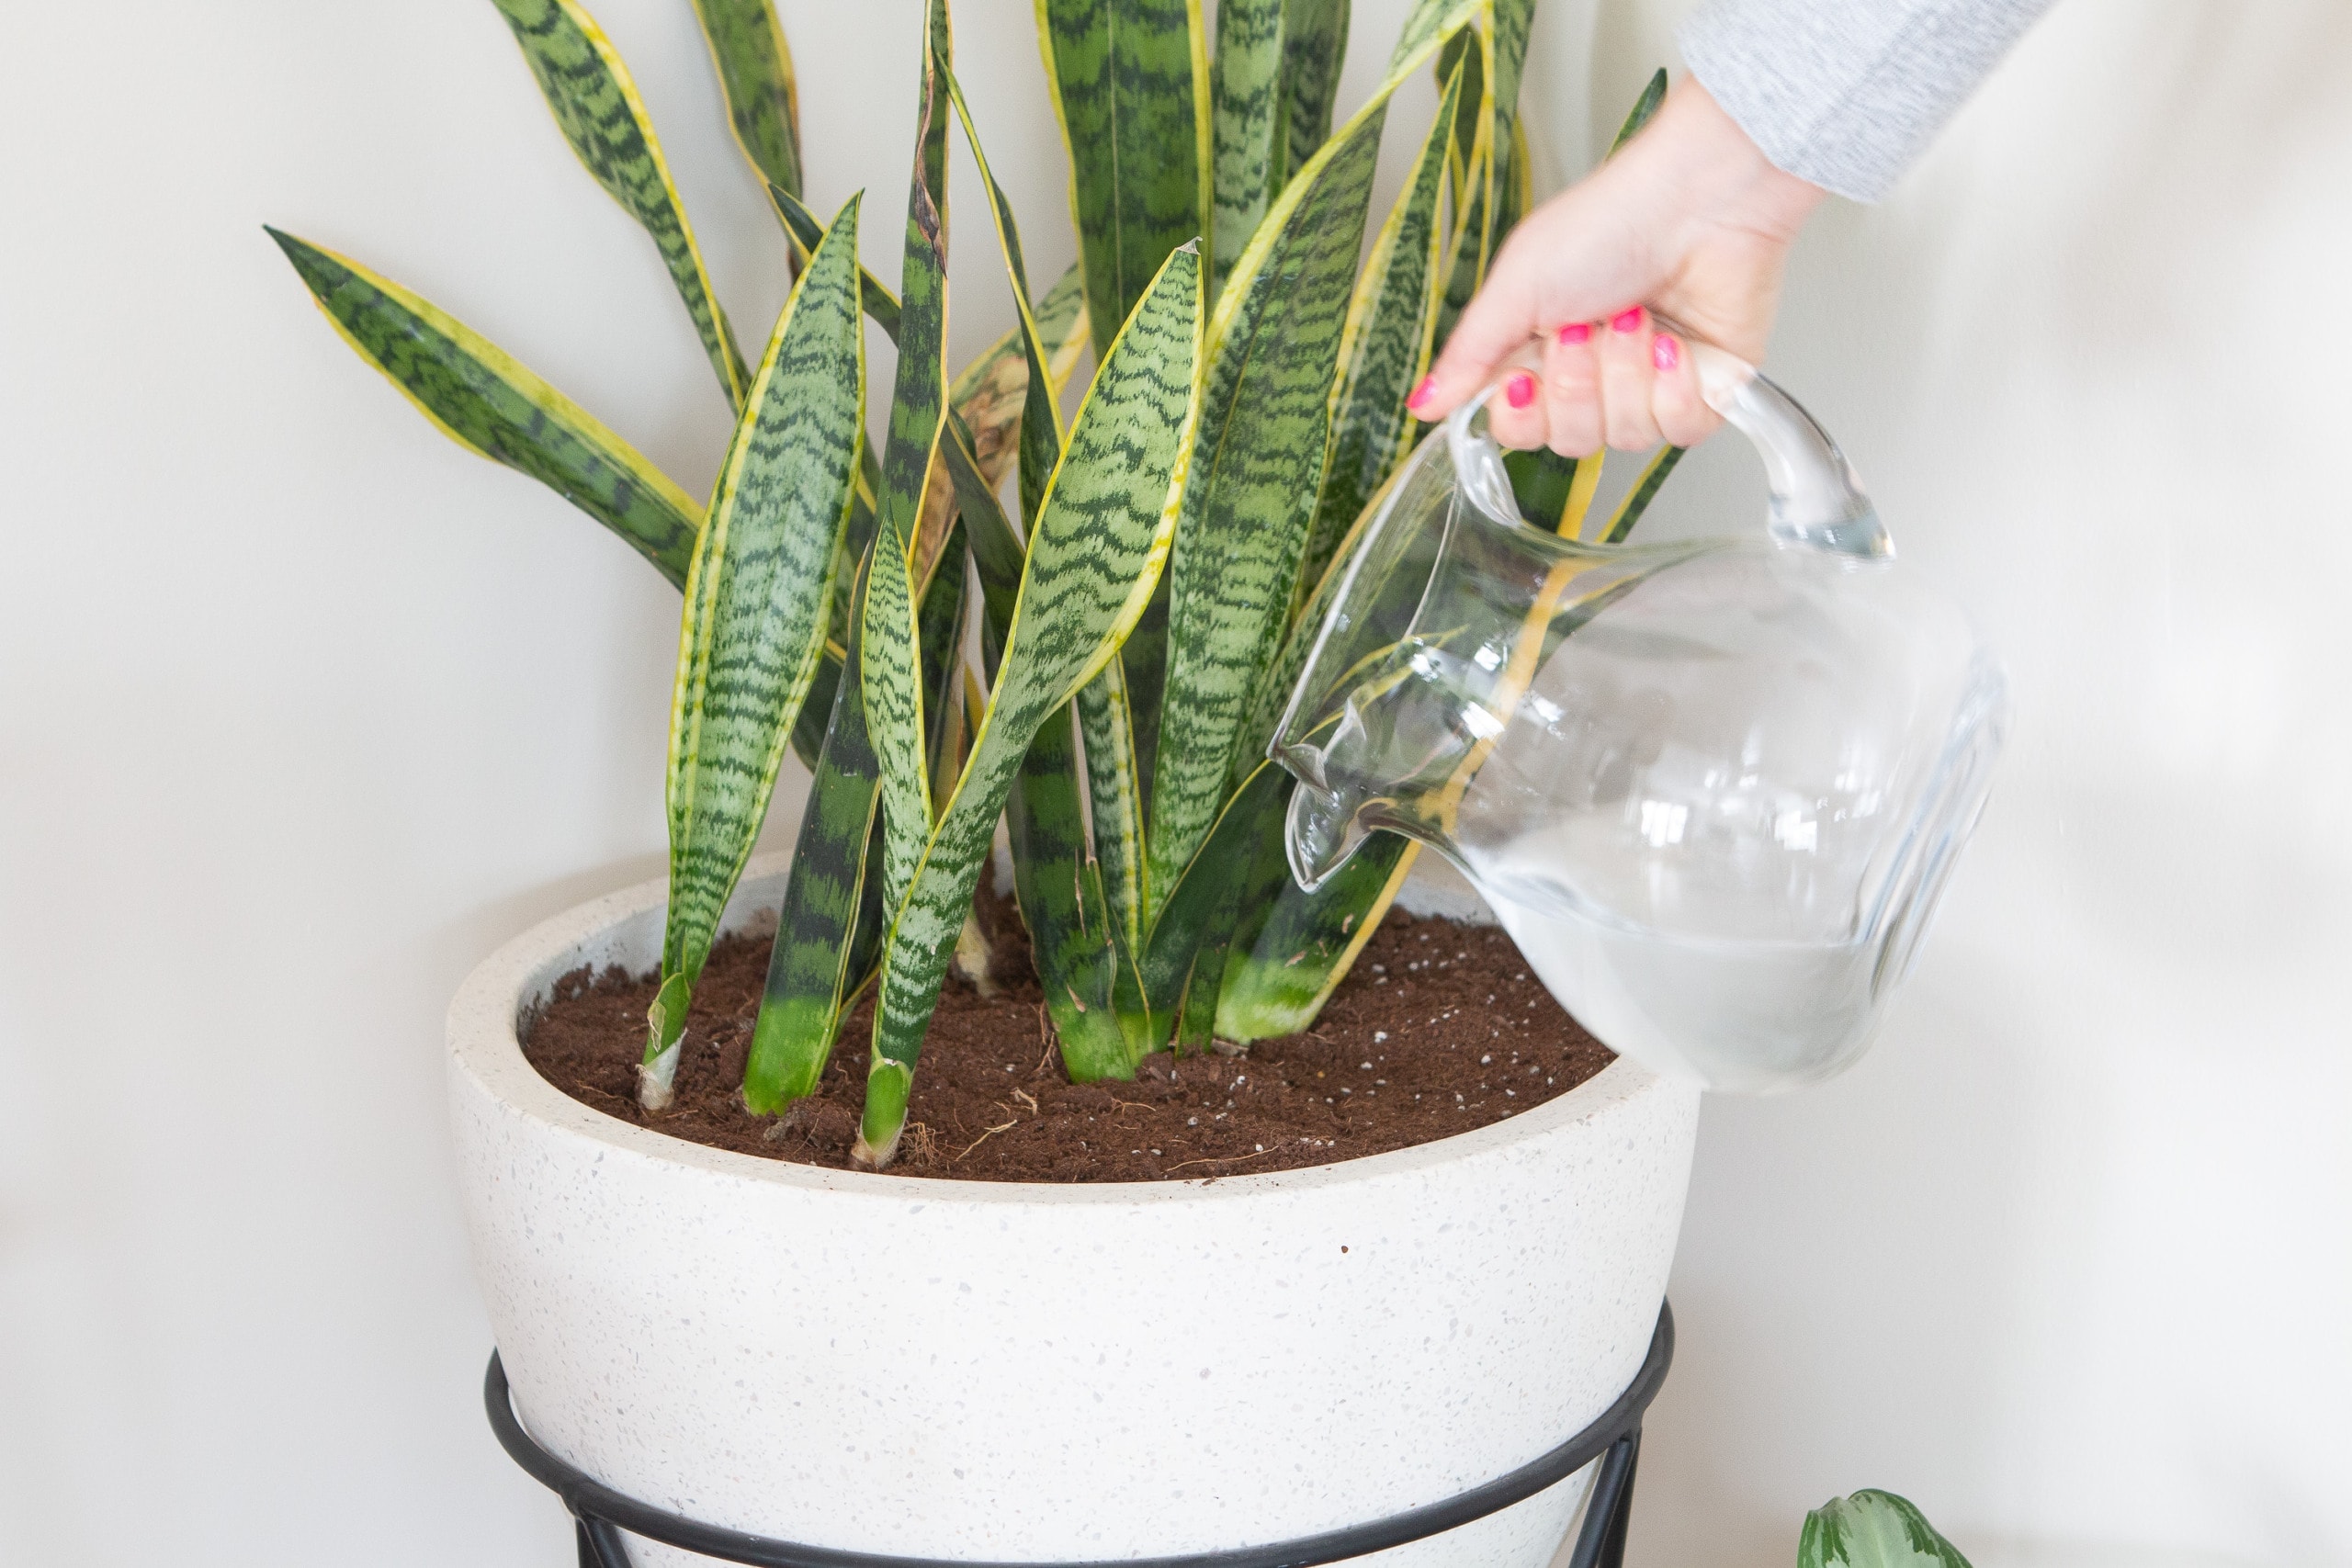 Water your indoor plants once a week